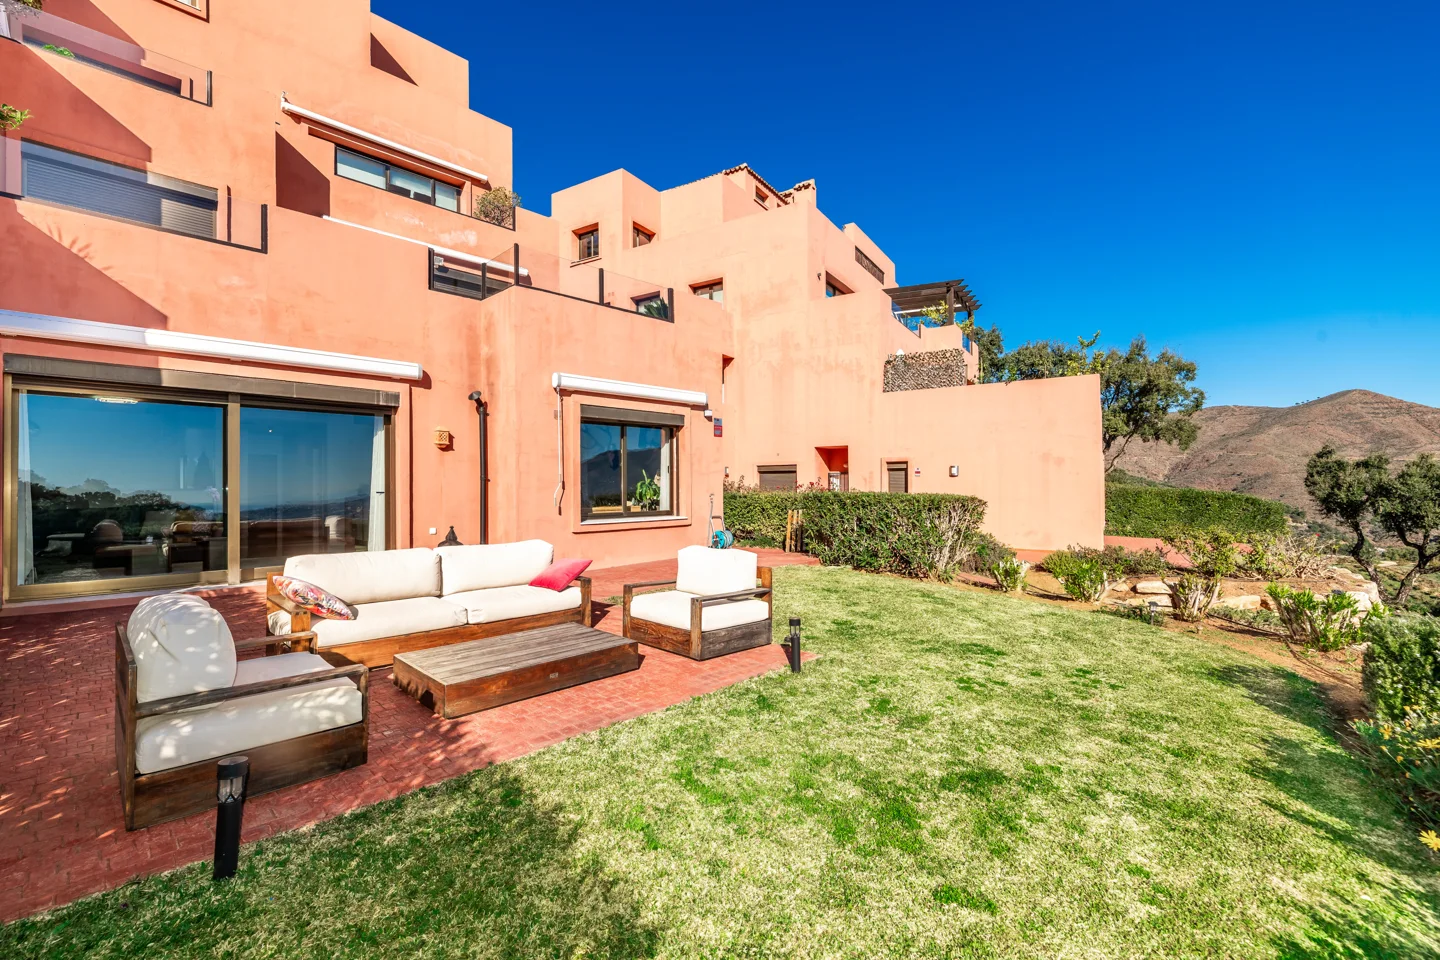 La Mairena: Beautiful 3 bedroom apartment with lovely views